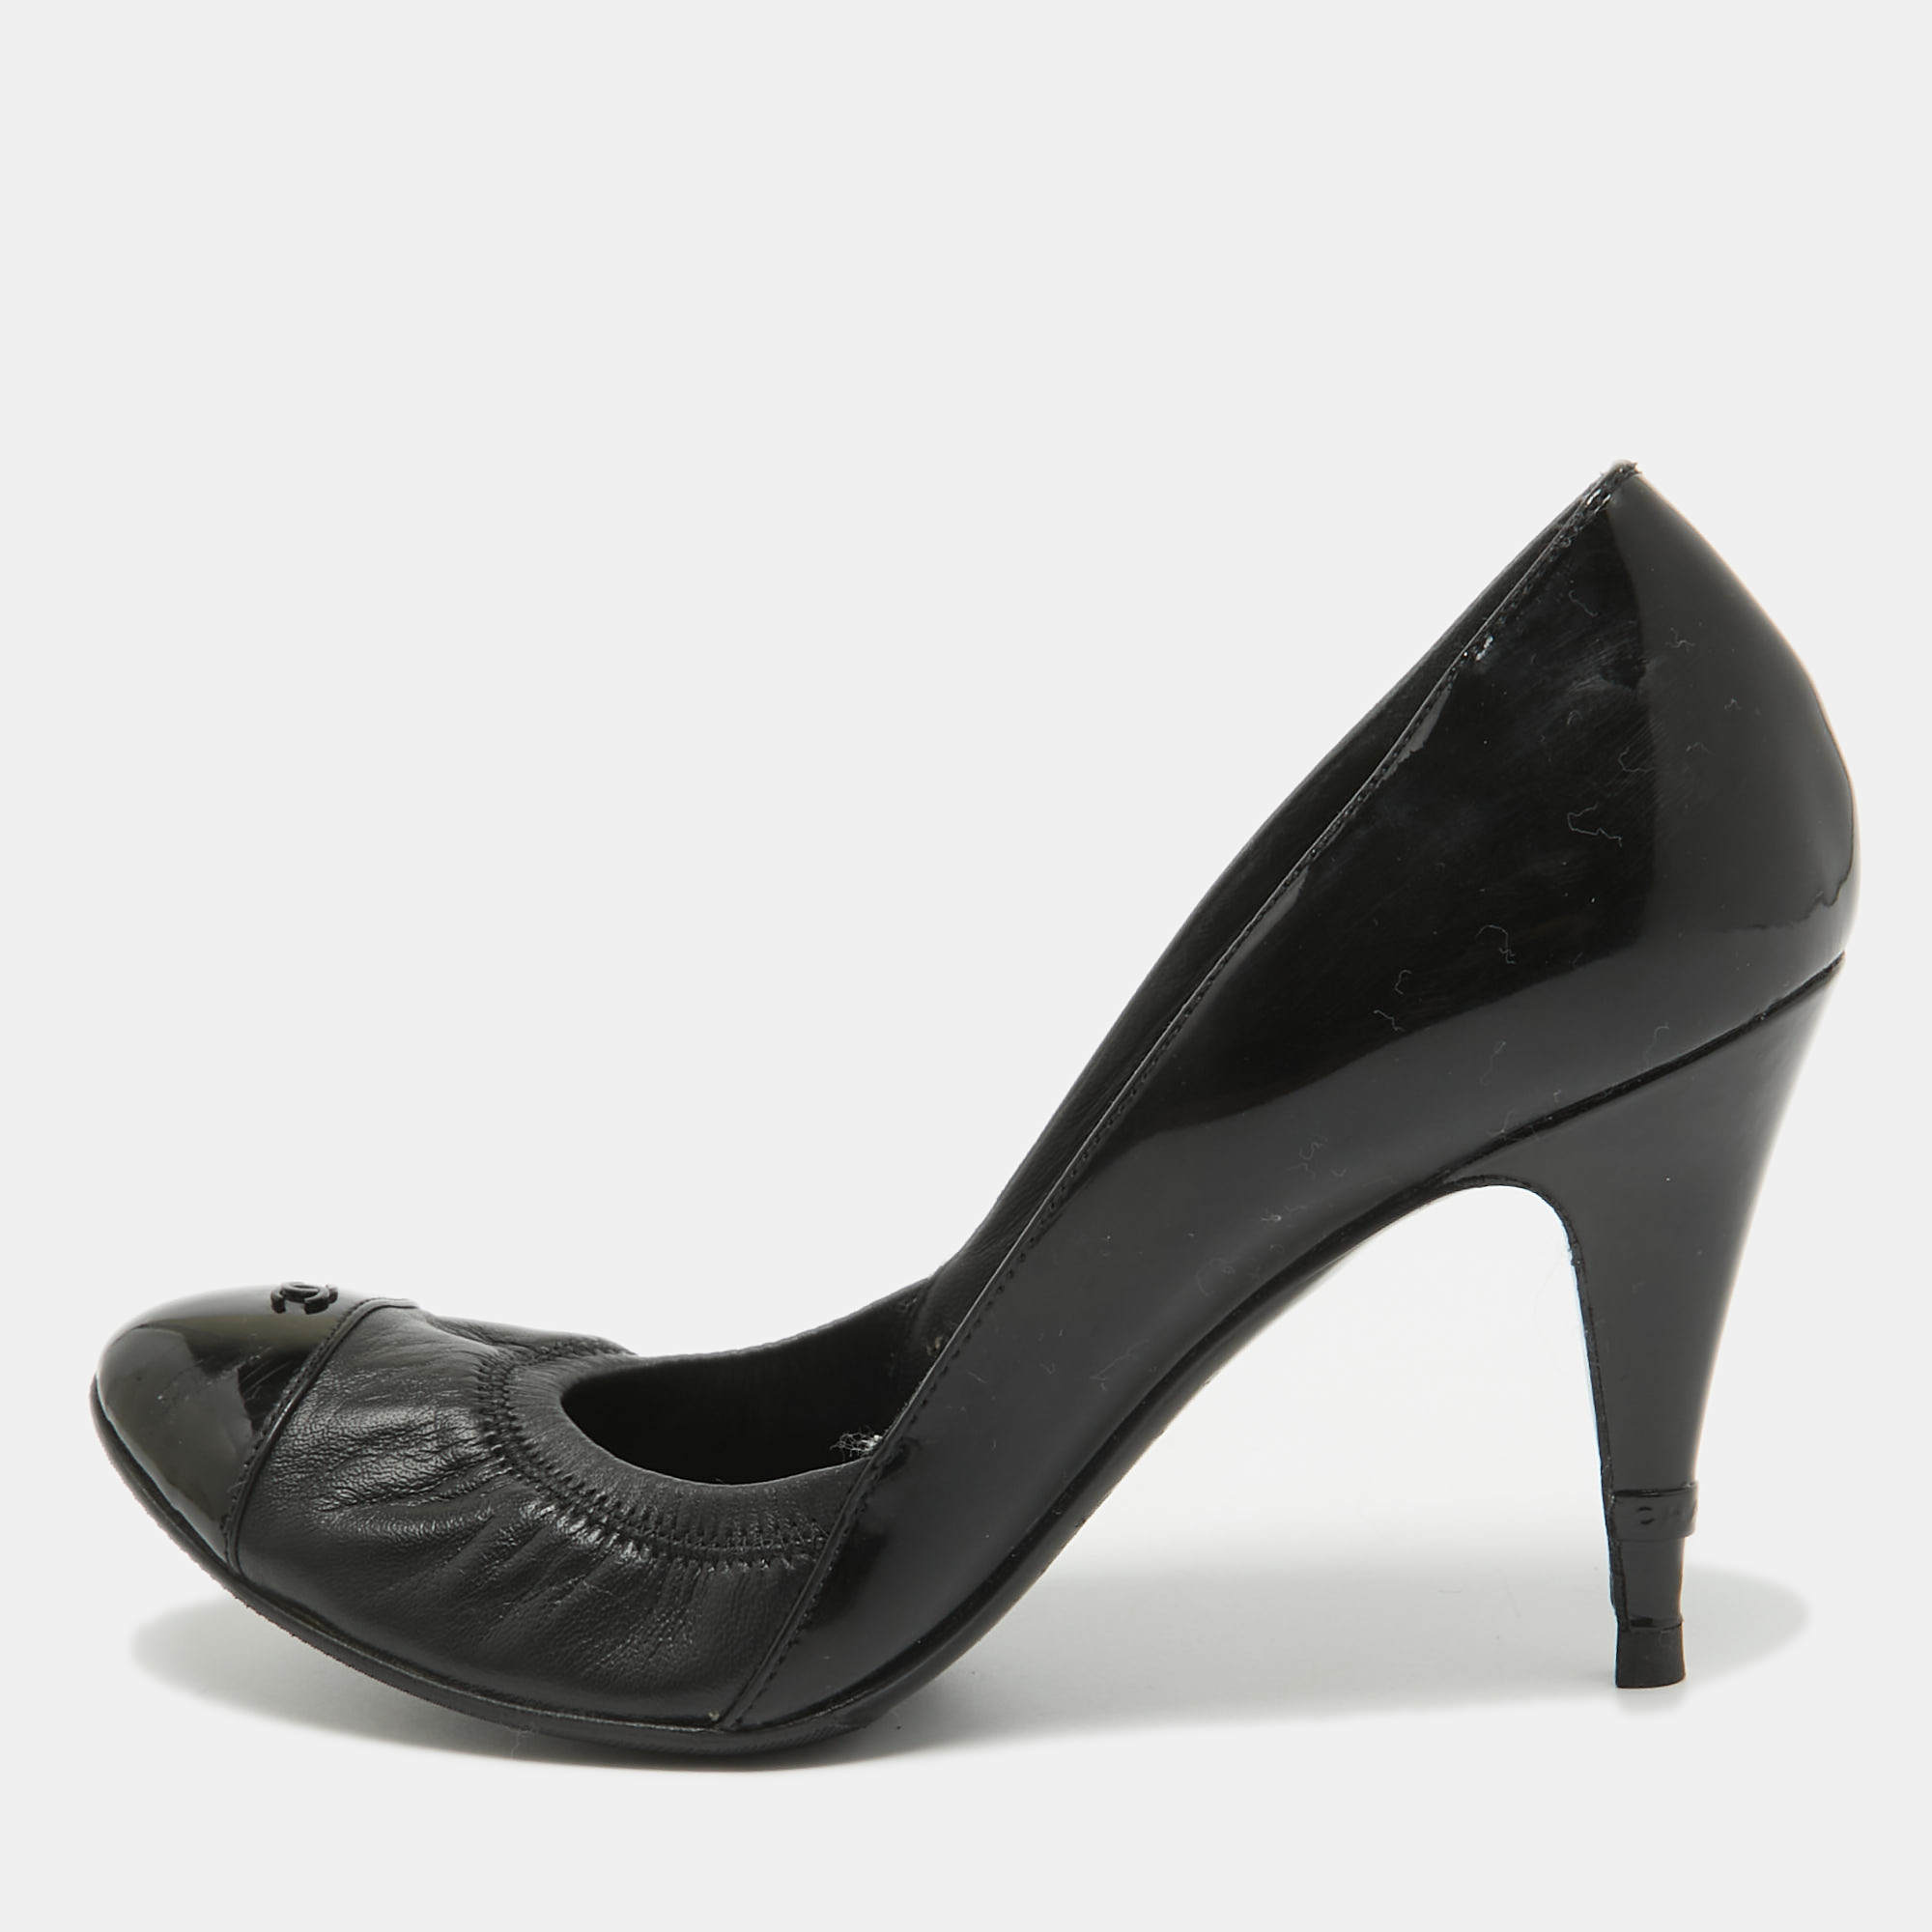 Chanel black patent and leather cc scrunch pumps size 39